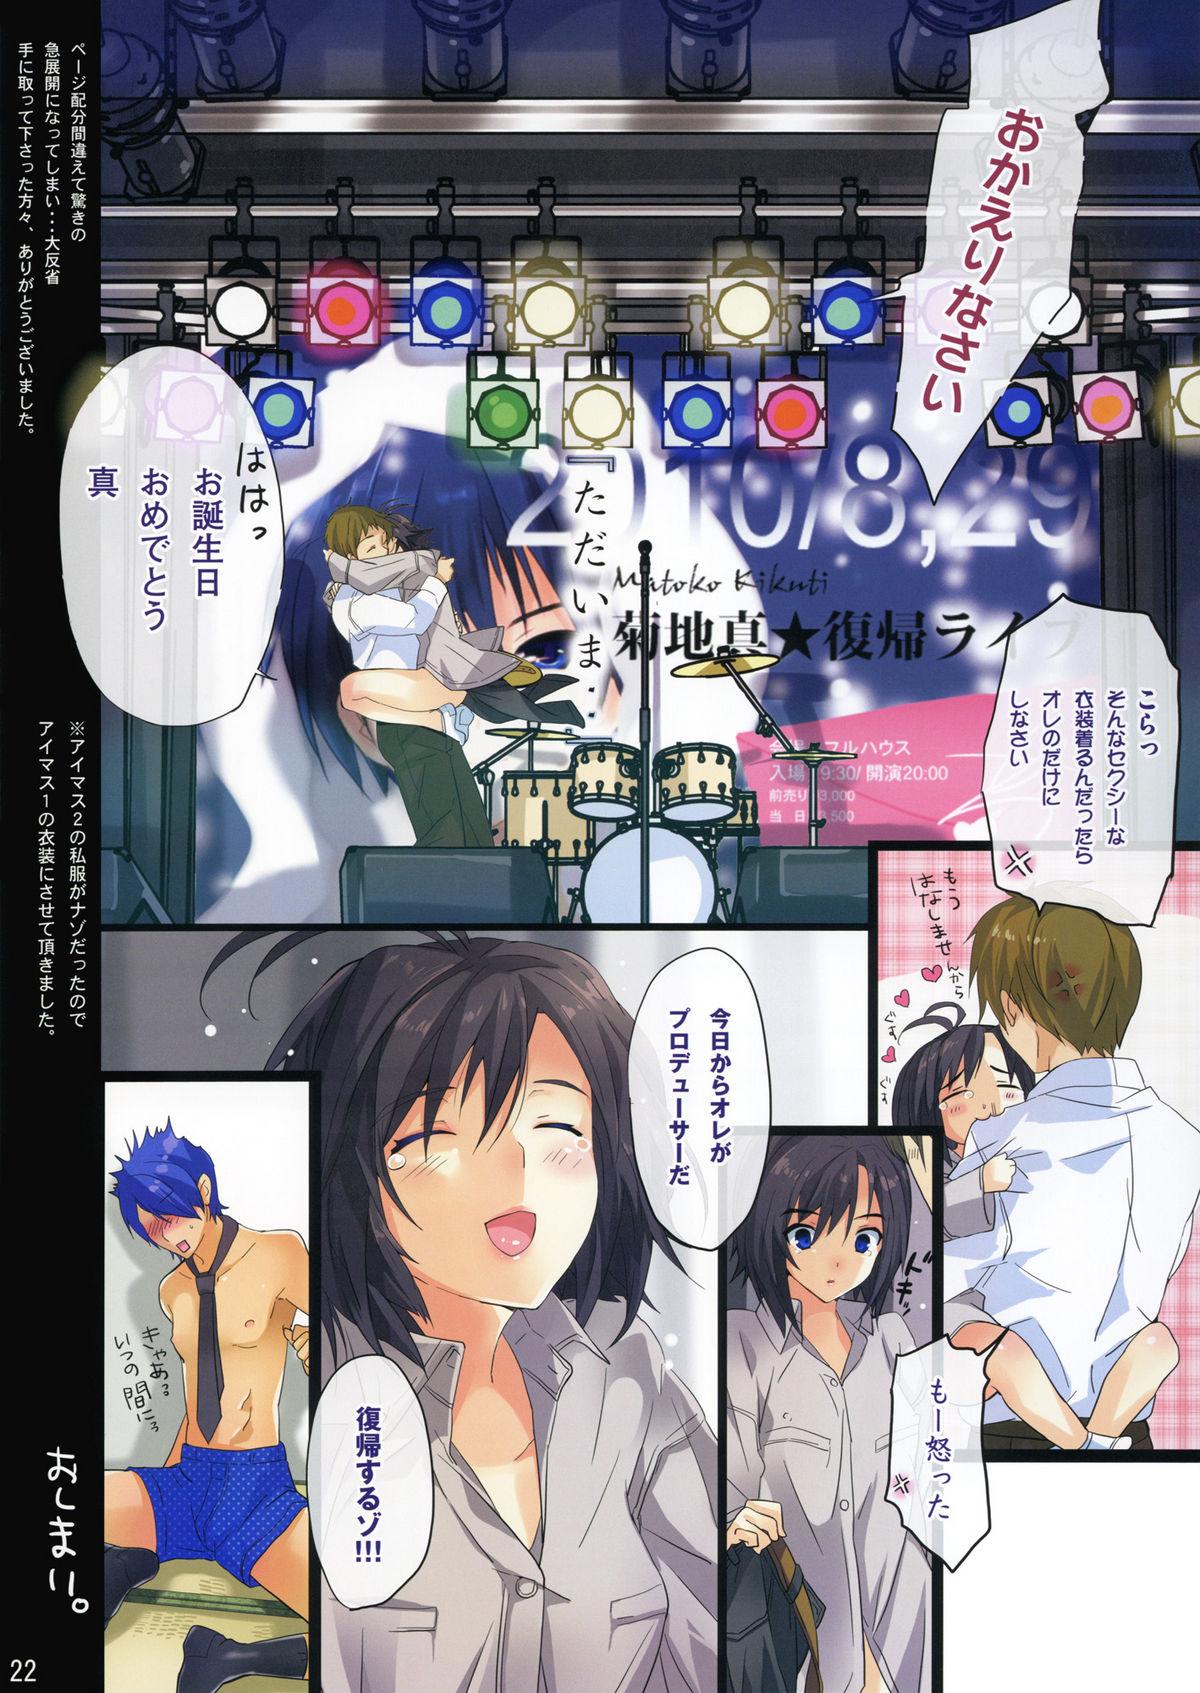 Moan Powerful Otome 2 - The idolmaster Sola - Page 21